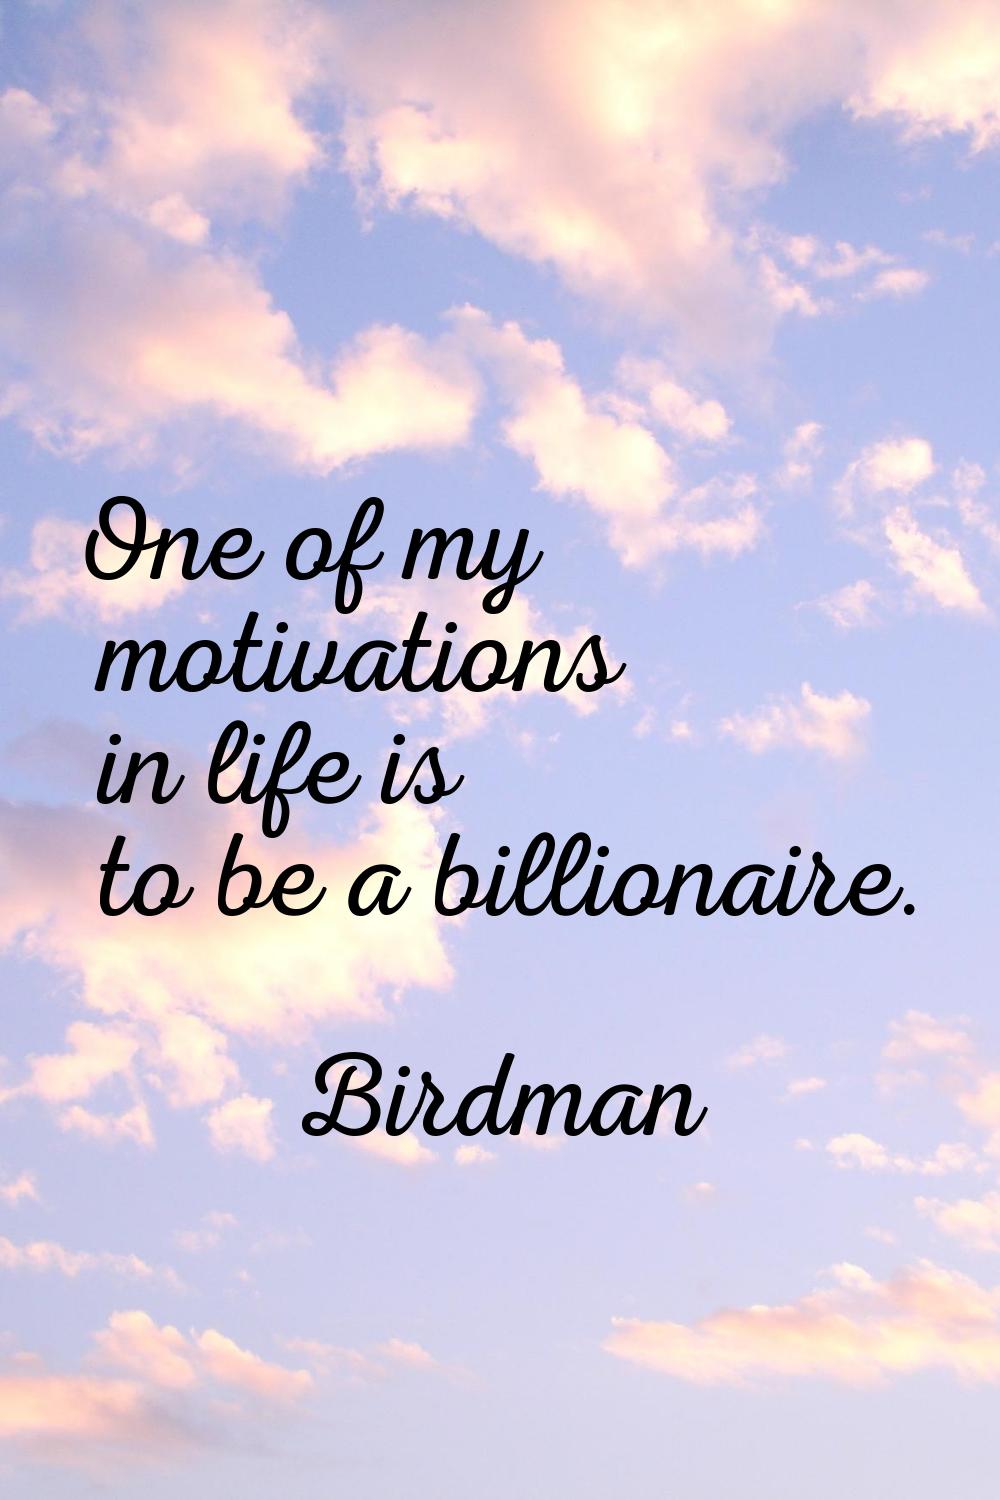 One of my motivations in life is to be a billionaire.